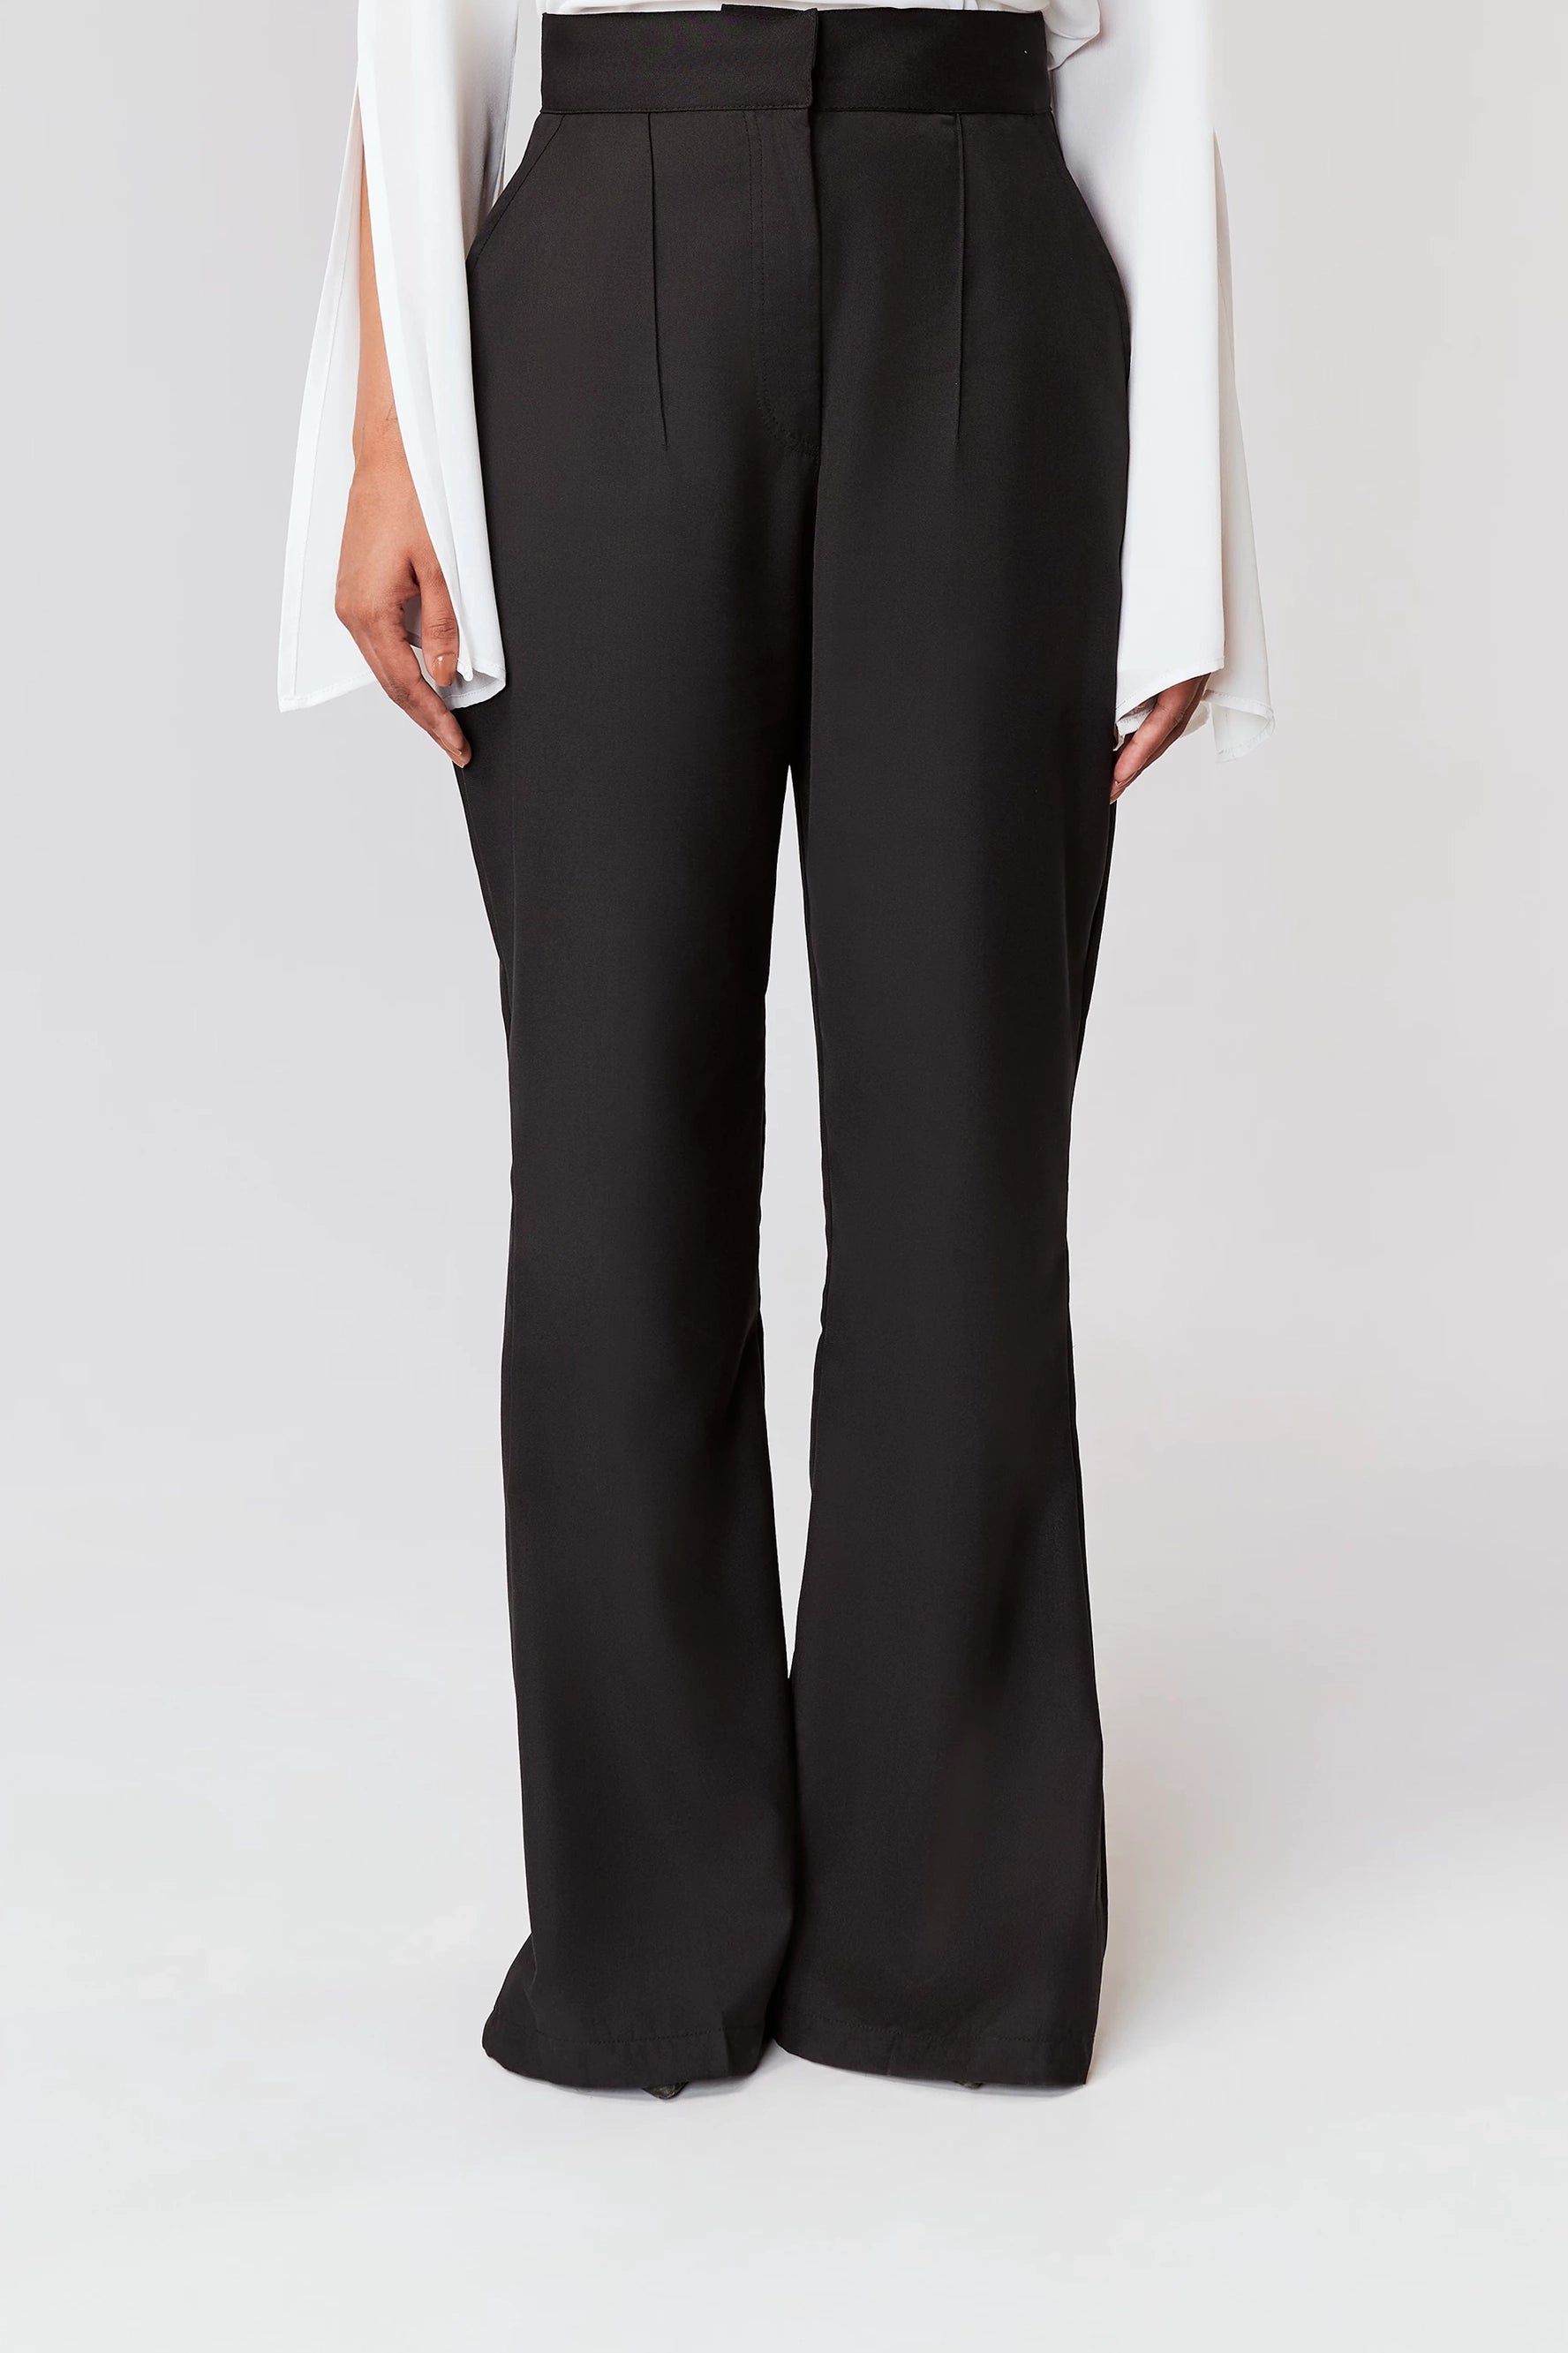 Winter trousers for women and discover loose trousers for women online